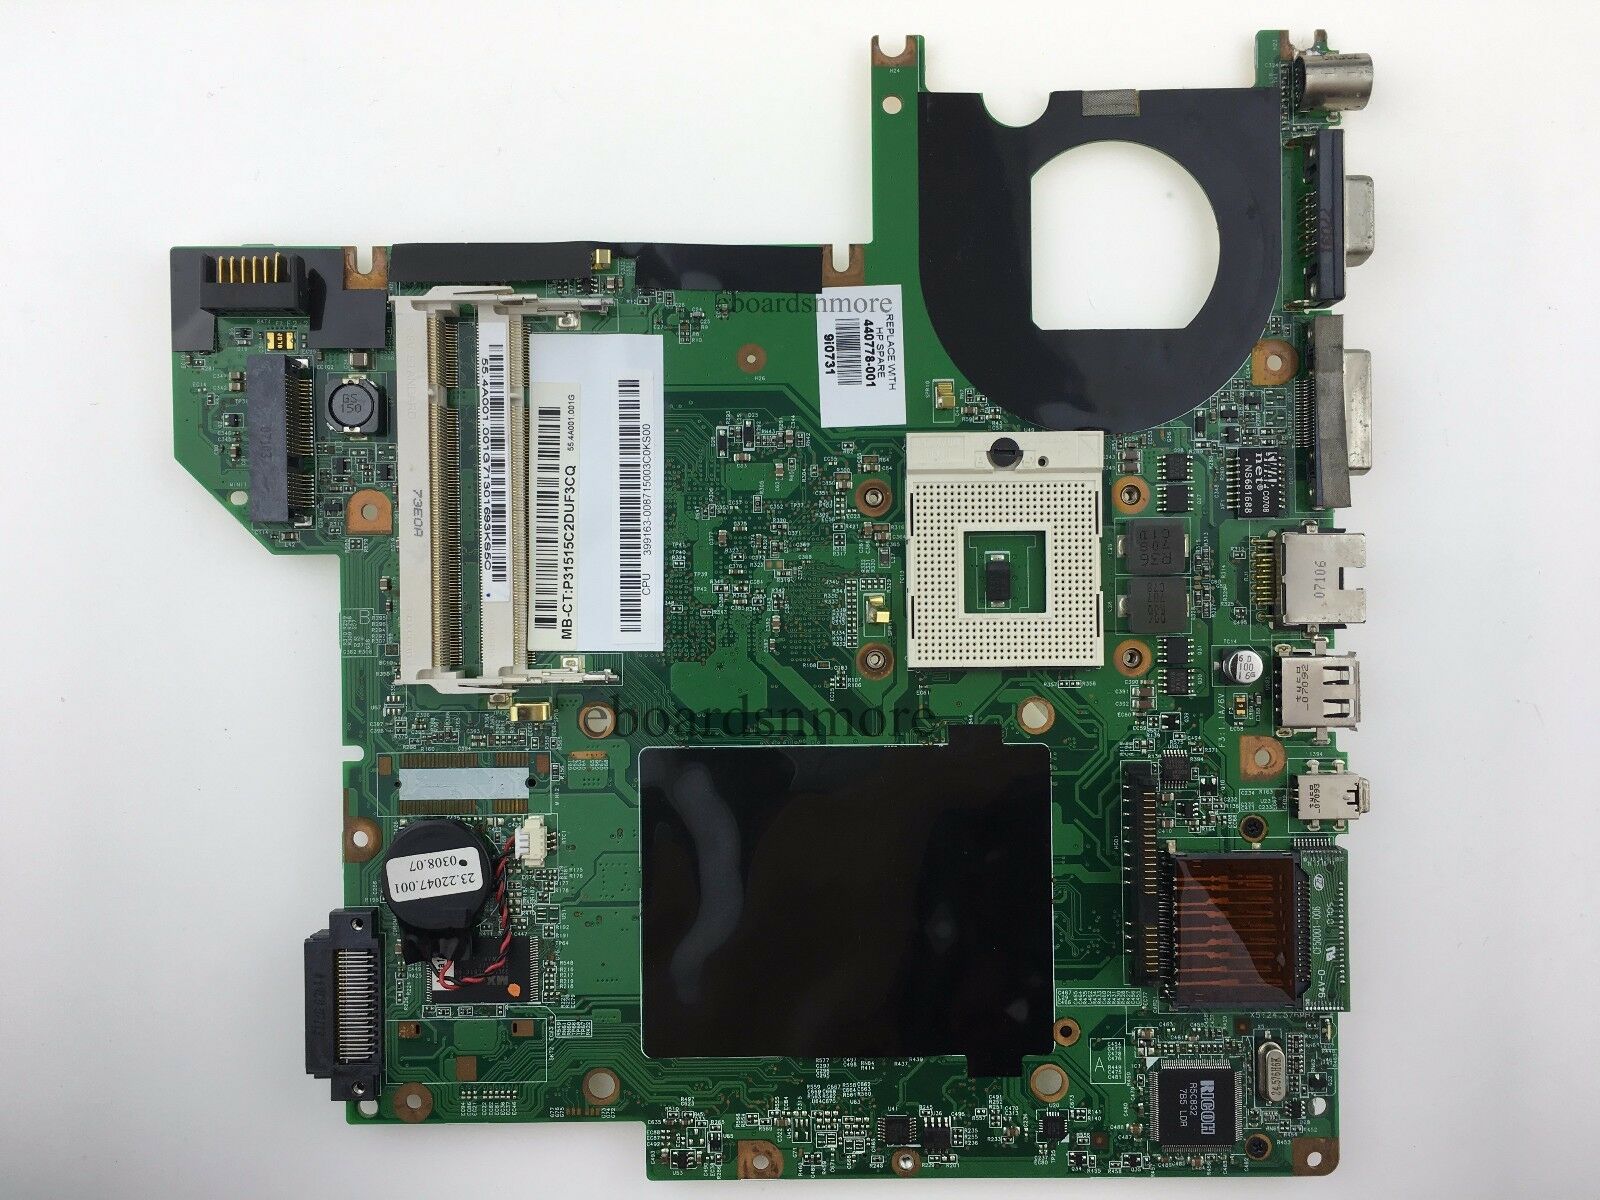 440778-001 Motherboard for HP DV2000 series Laptop, Intel HD, 48.4F501.051 A Socket Type: SEE PICS OR DESCRI